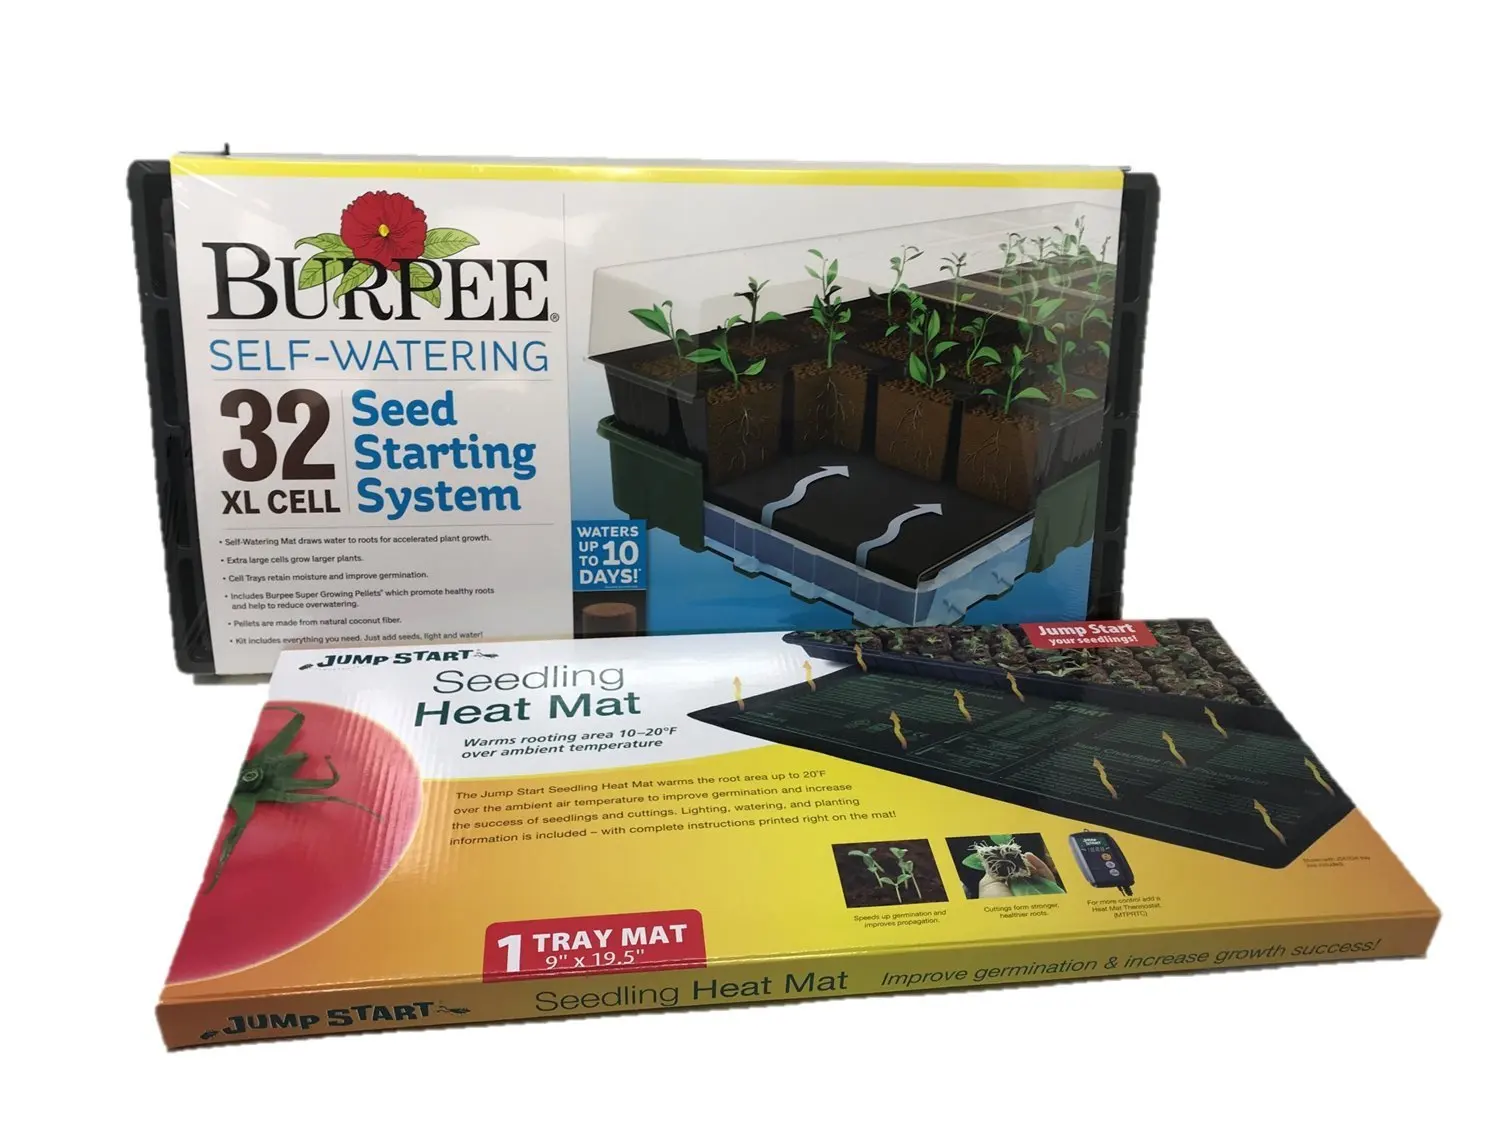 Burpee 91001C 32 Cell Seed Starting Kit with Heat Mat, 10" x 20"....